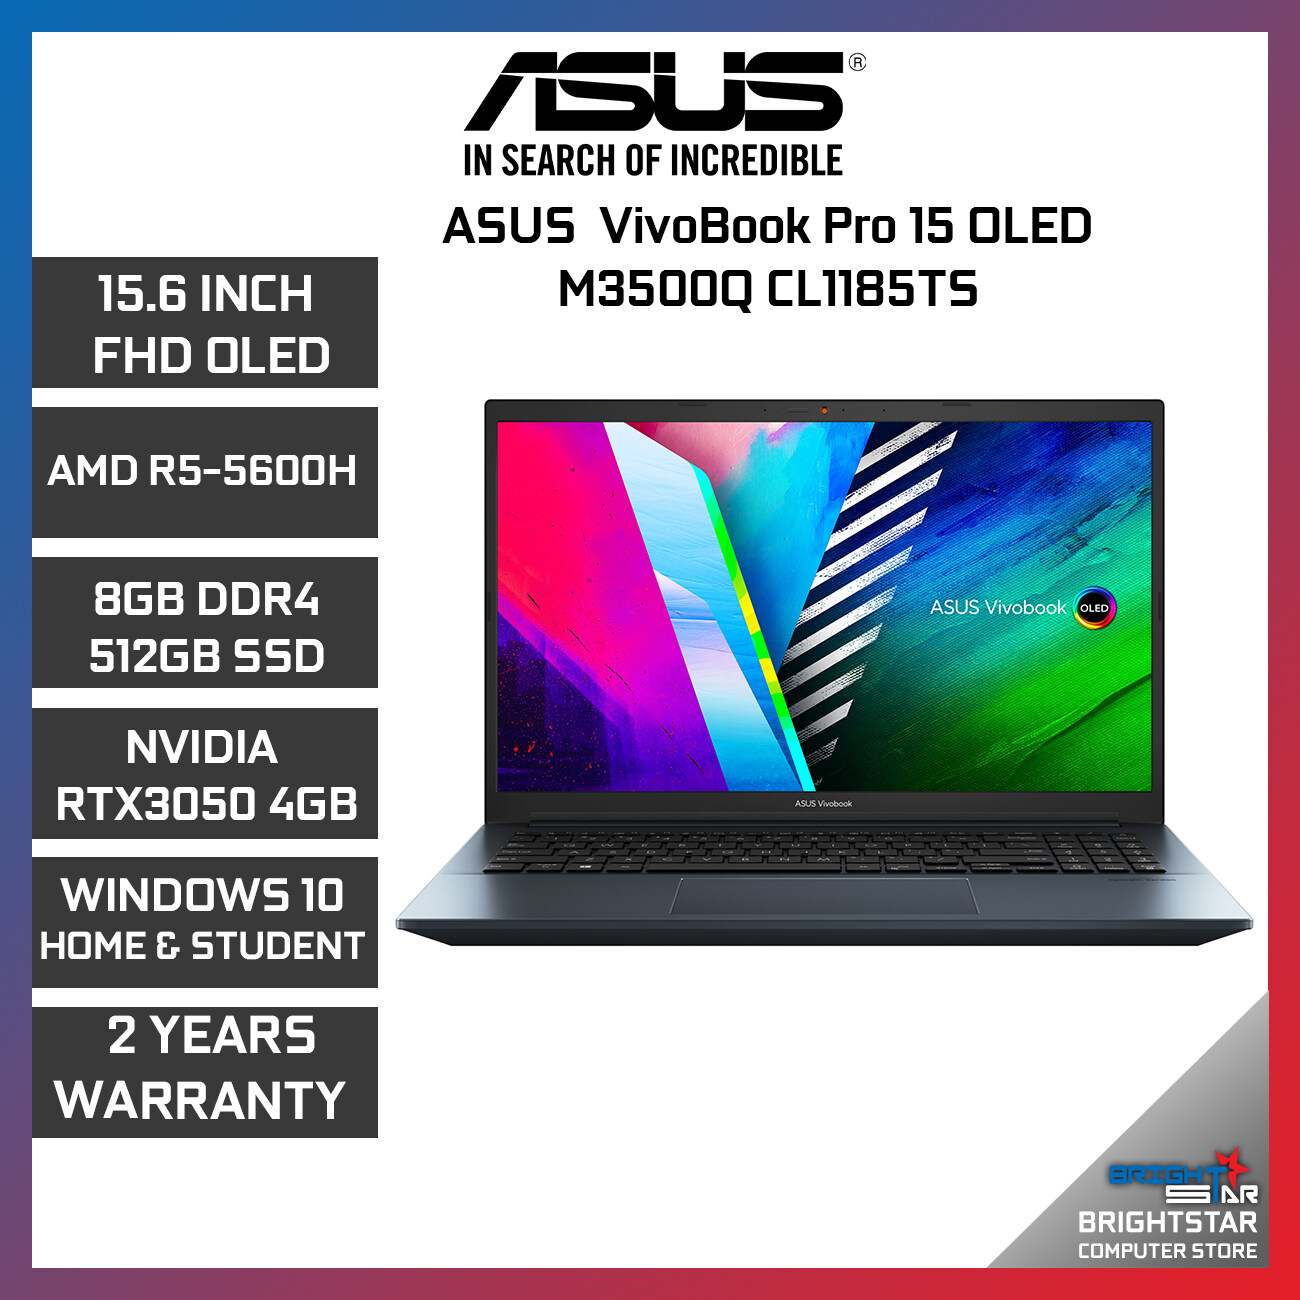 ASUS New Laptop VivoBook Pro 15 OLED M3500Q CL1185TS (15.6 Inch